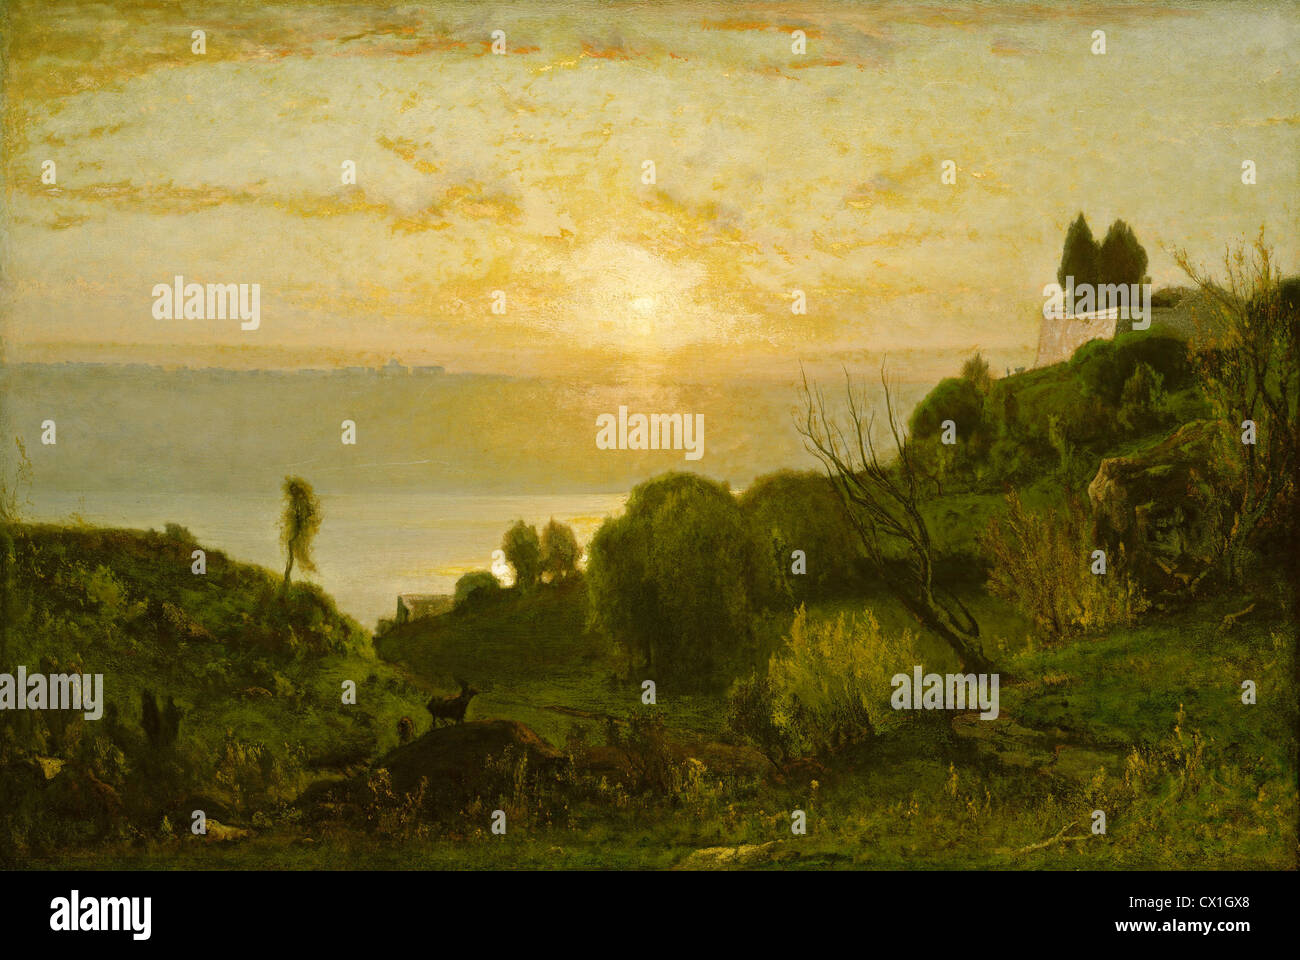 George Inness, Lake Albano, Sunset, American, 1825 - 1894, c. 1874, oil on canvas Stock Photo